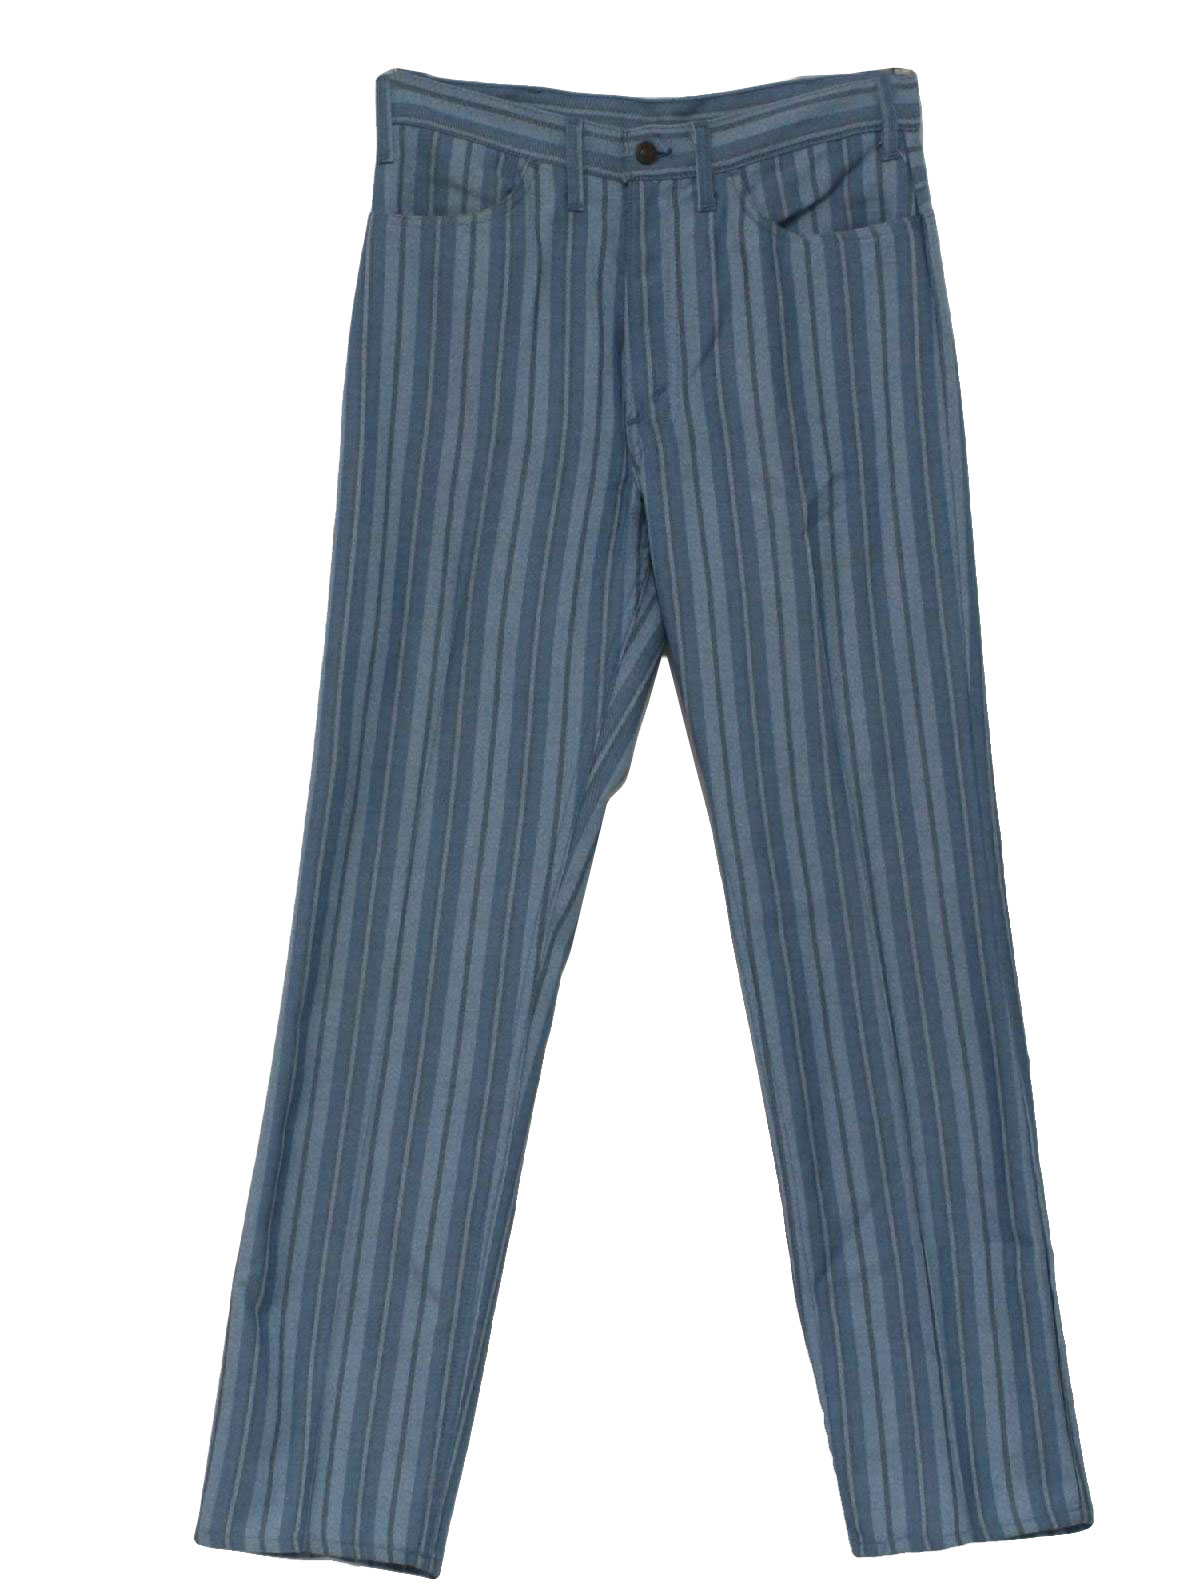 Retro Sixties Pants: Early 60s -LEVIS Sta Prest- Mens shaded blue on ...